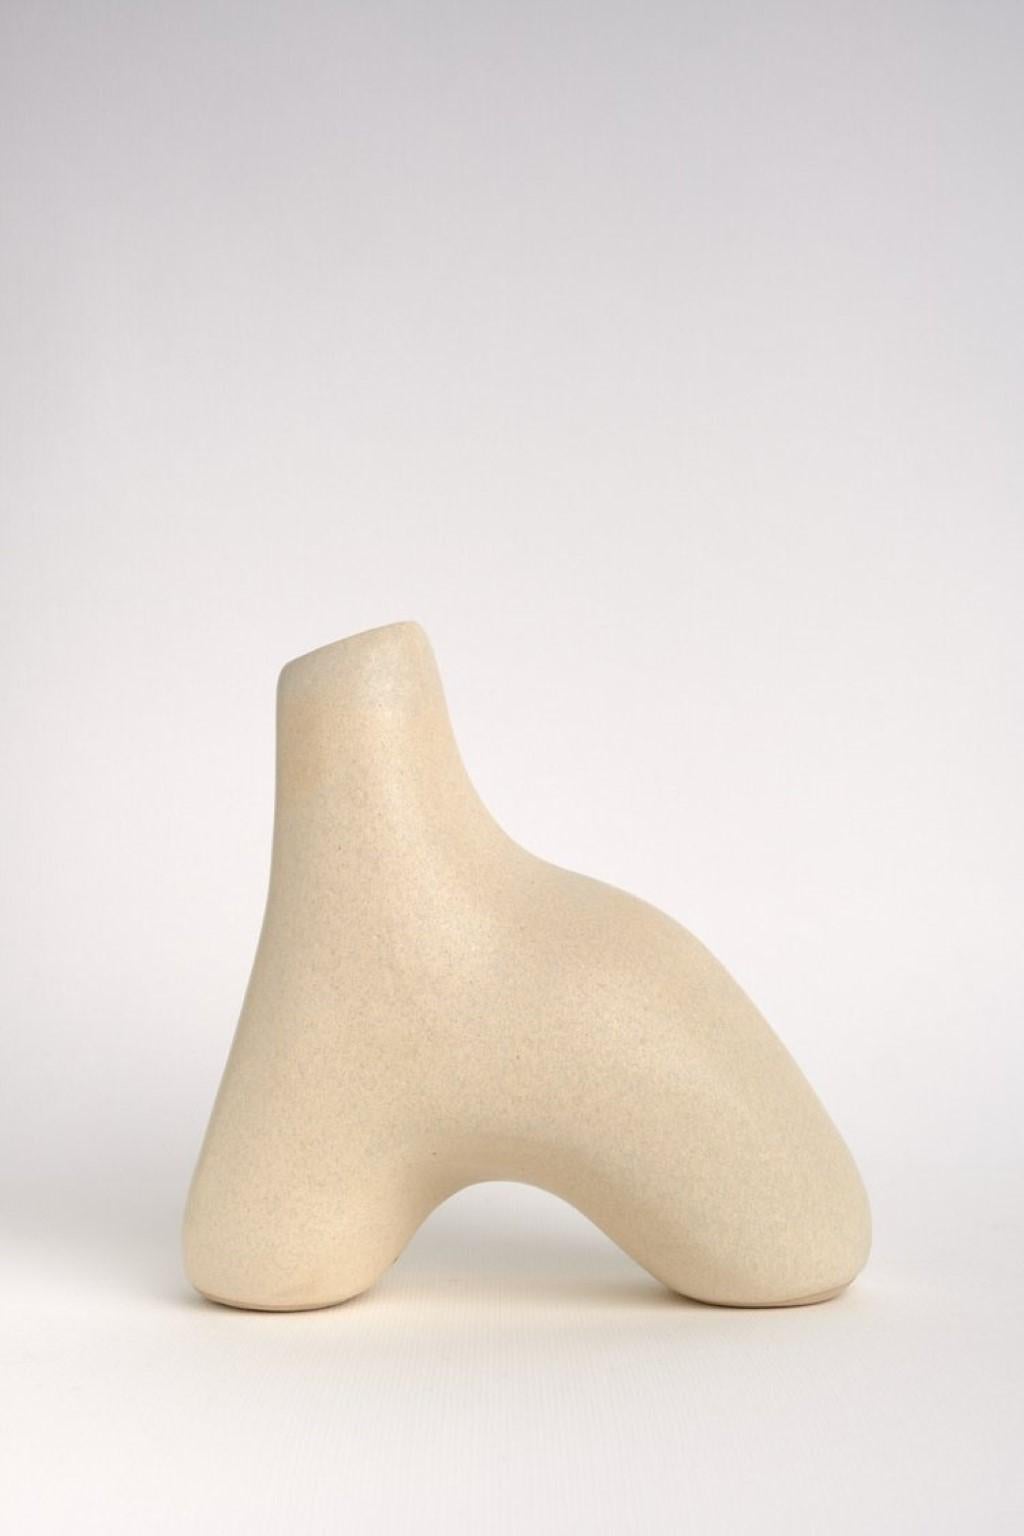 Garrafa No. II vase by Camila Apaez
One of a kind
Materials: Stoneware
Dimensions: 16 x 8 x 16 cm.
Glaze: Buttermilk
Other options: White bone, chocolate, charcoal black, glossy, spotted gray, pale opal, nube, glossy.

This year has been